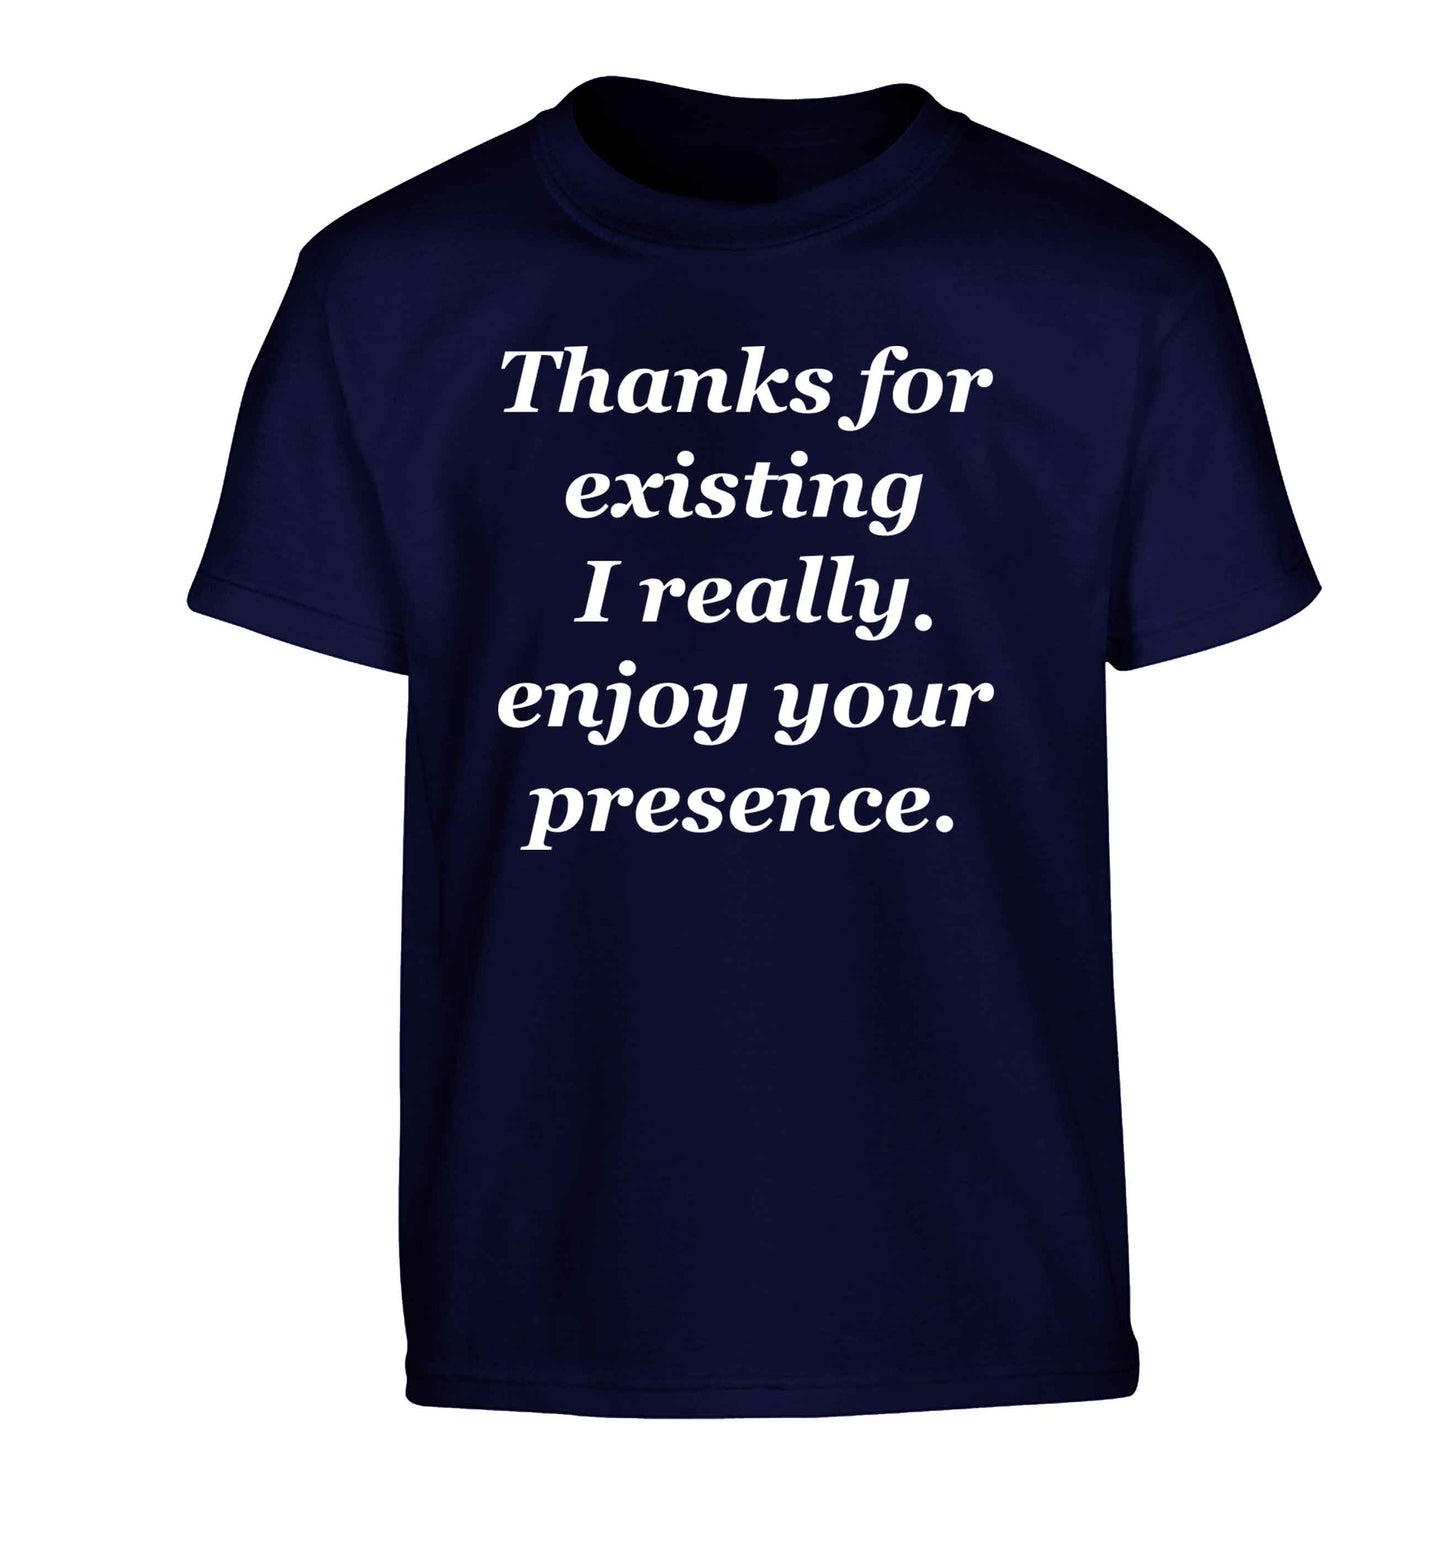 Thanks for existing I really enjoy your presence Children's navy Tshirt 12-13 Years